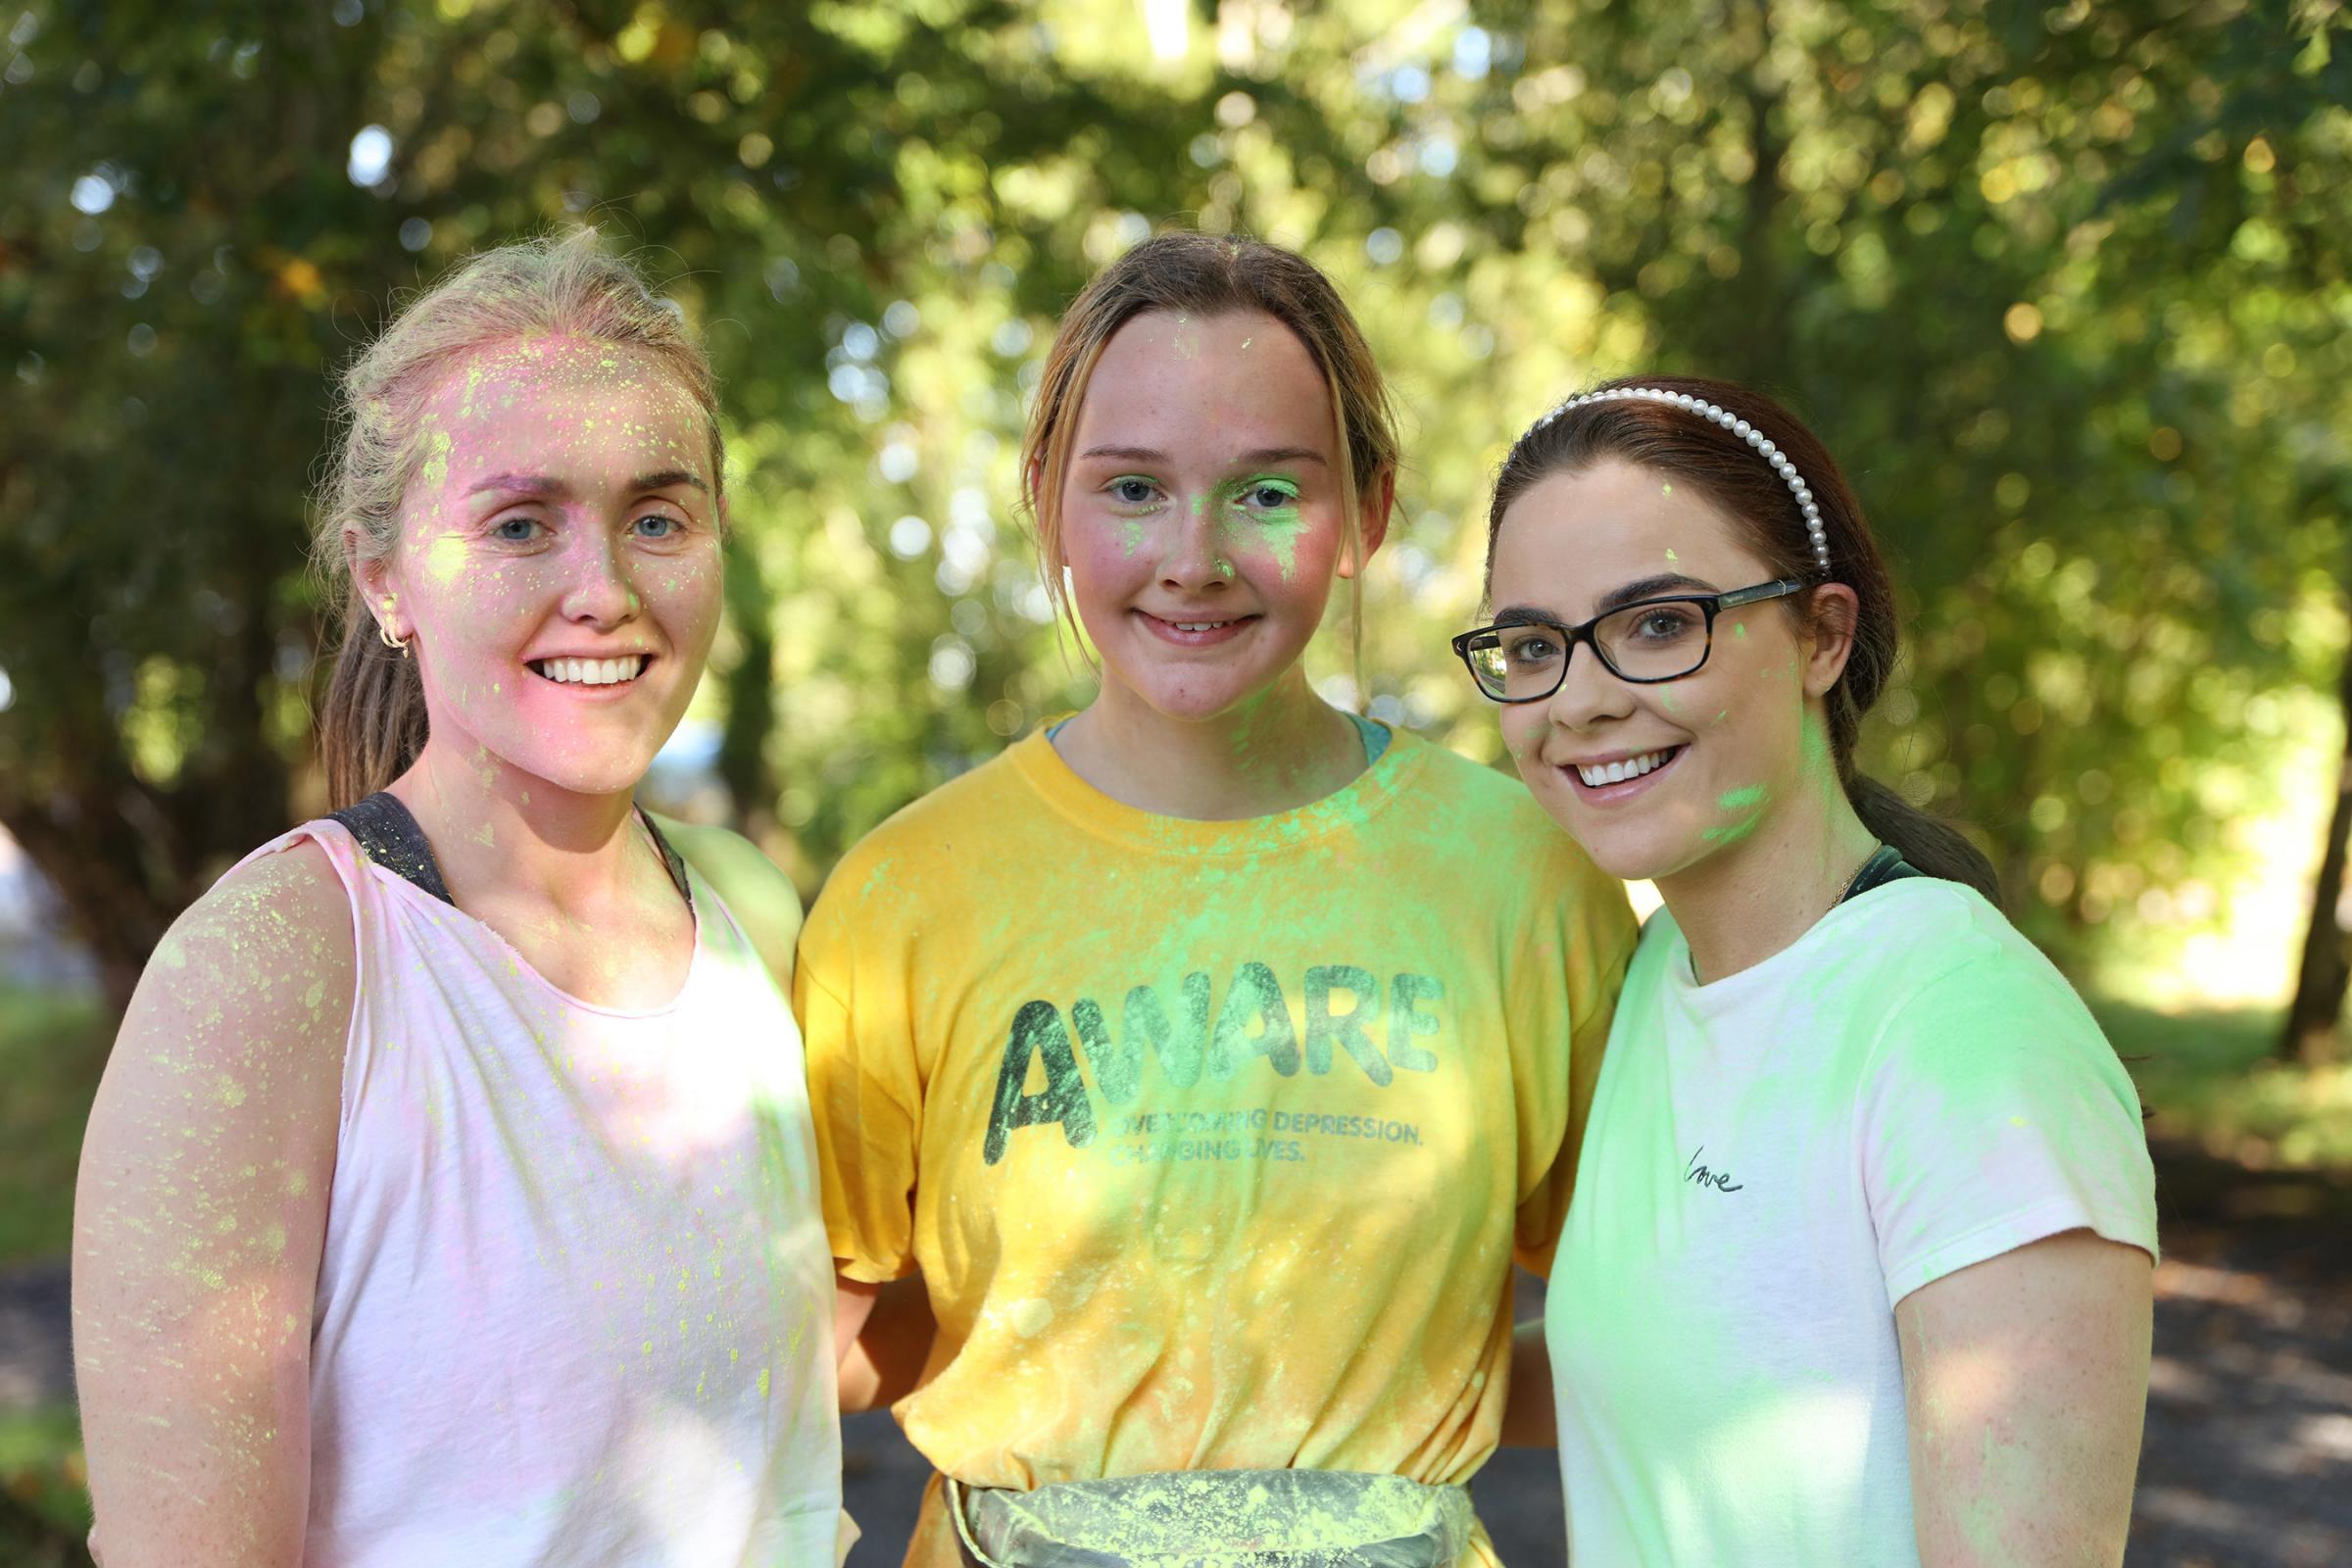 A different type of make up for Rachel McDermott, Keri Moore and Victoria Donaghy.